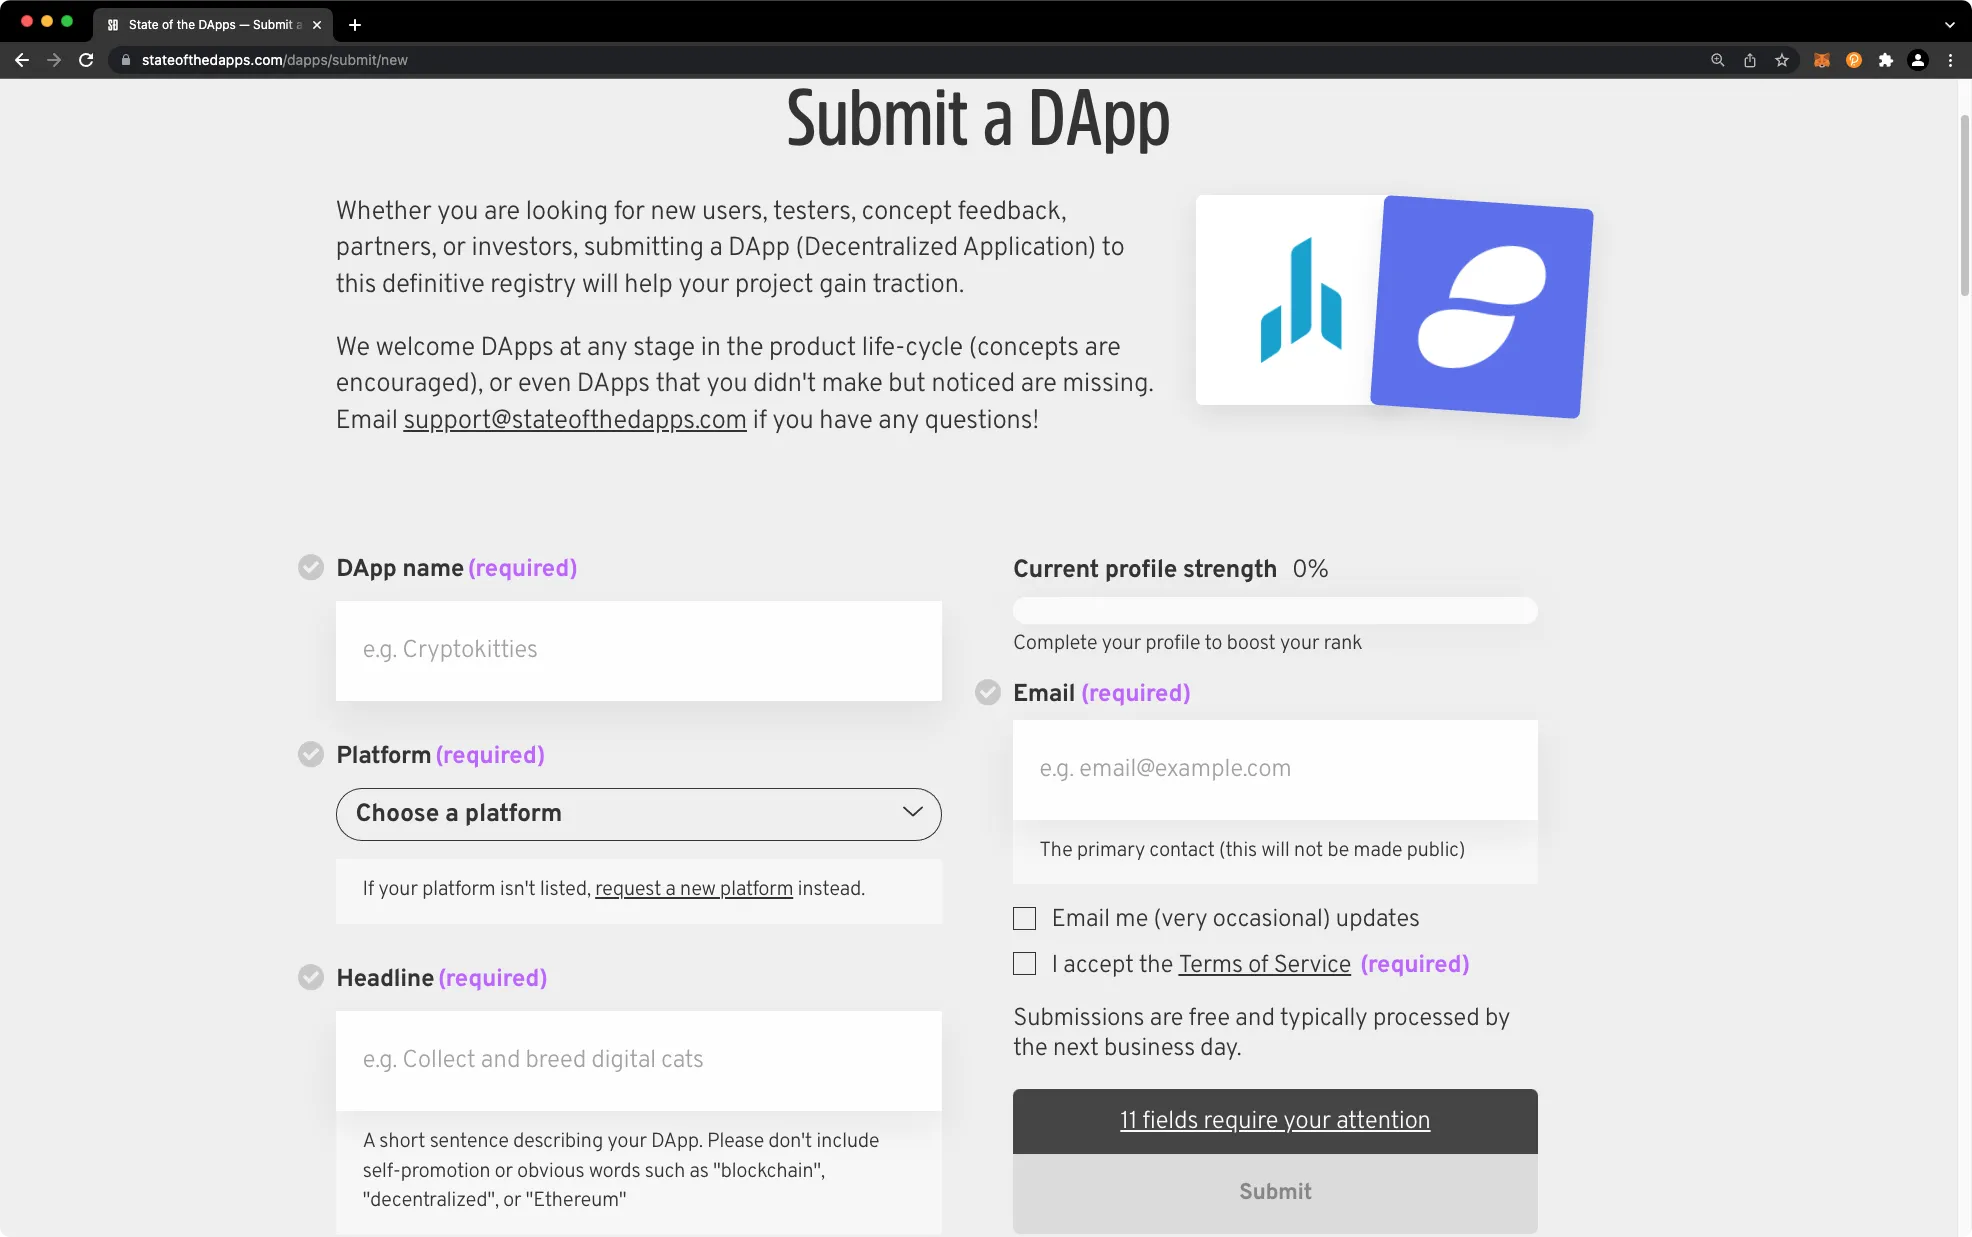 How to Submit your DApp